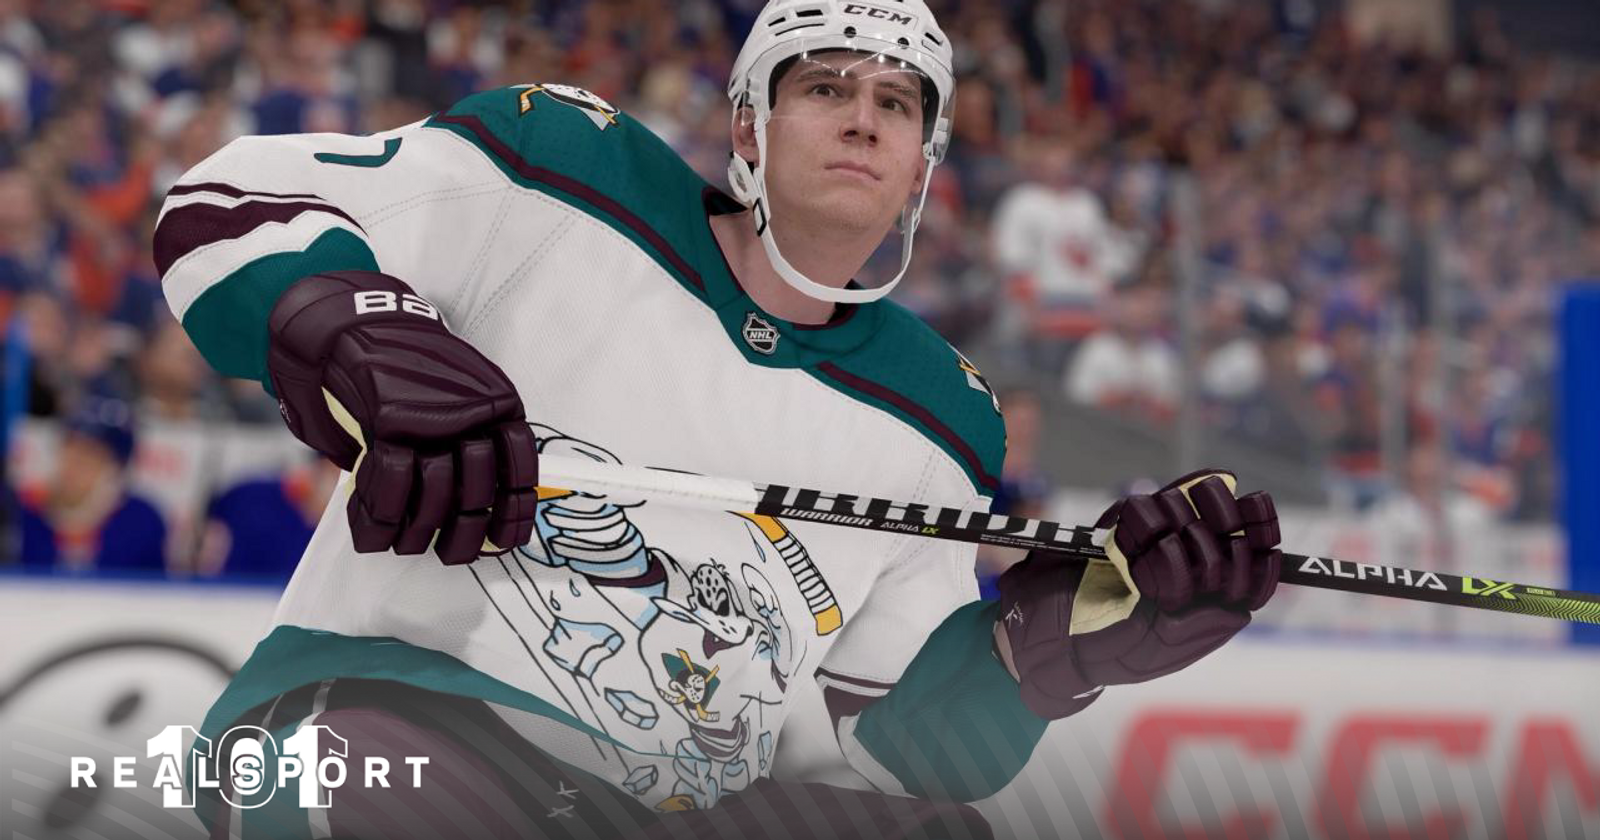 Mighty Ducks x #NHL23 Which jersey and skates are your fav? 🤔 Learn more  ➡️ link in bio